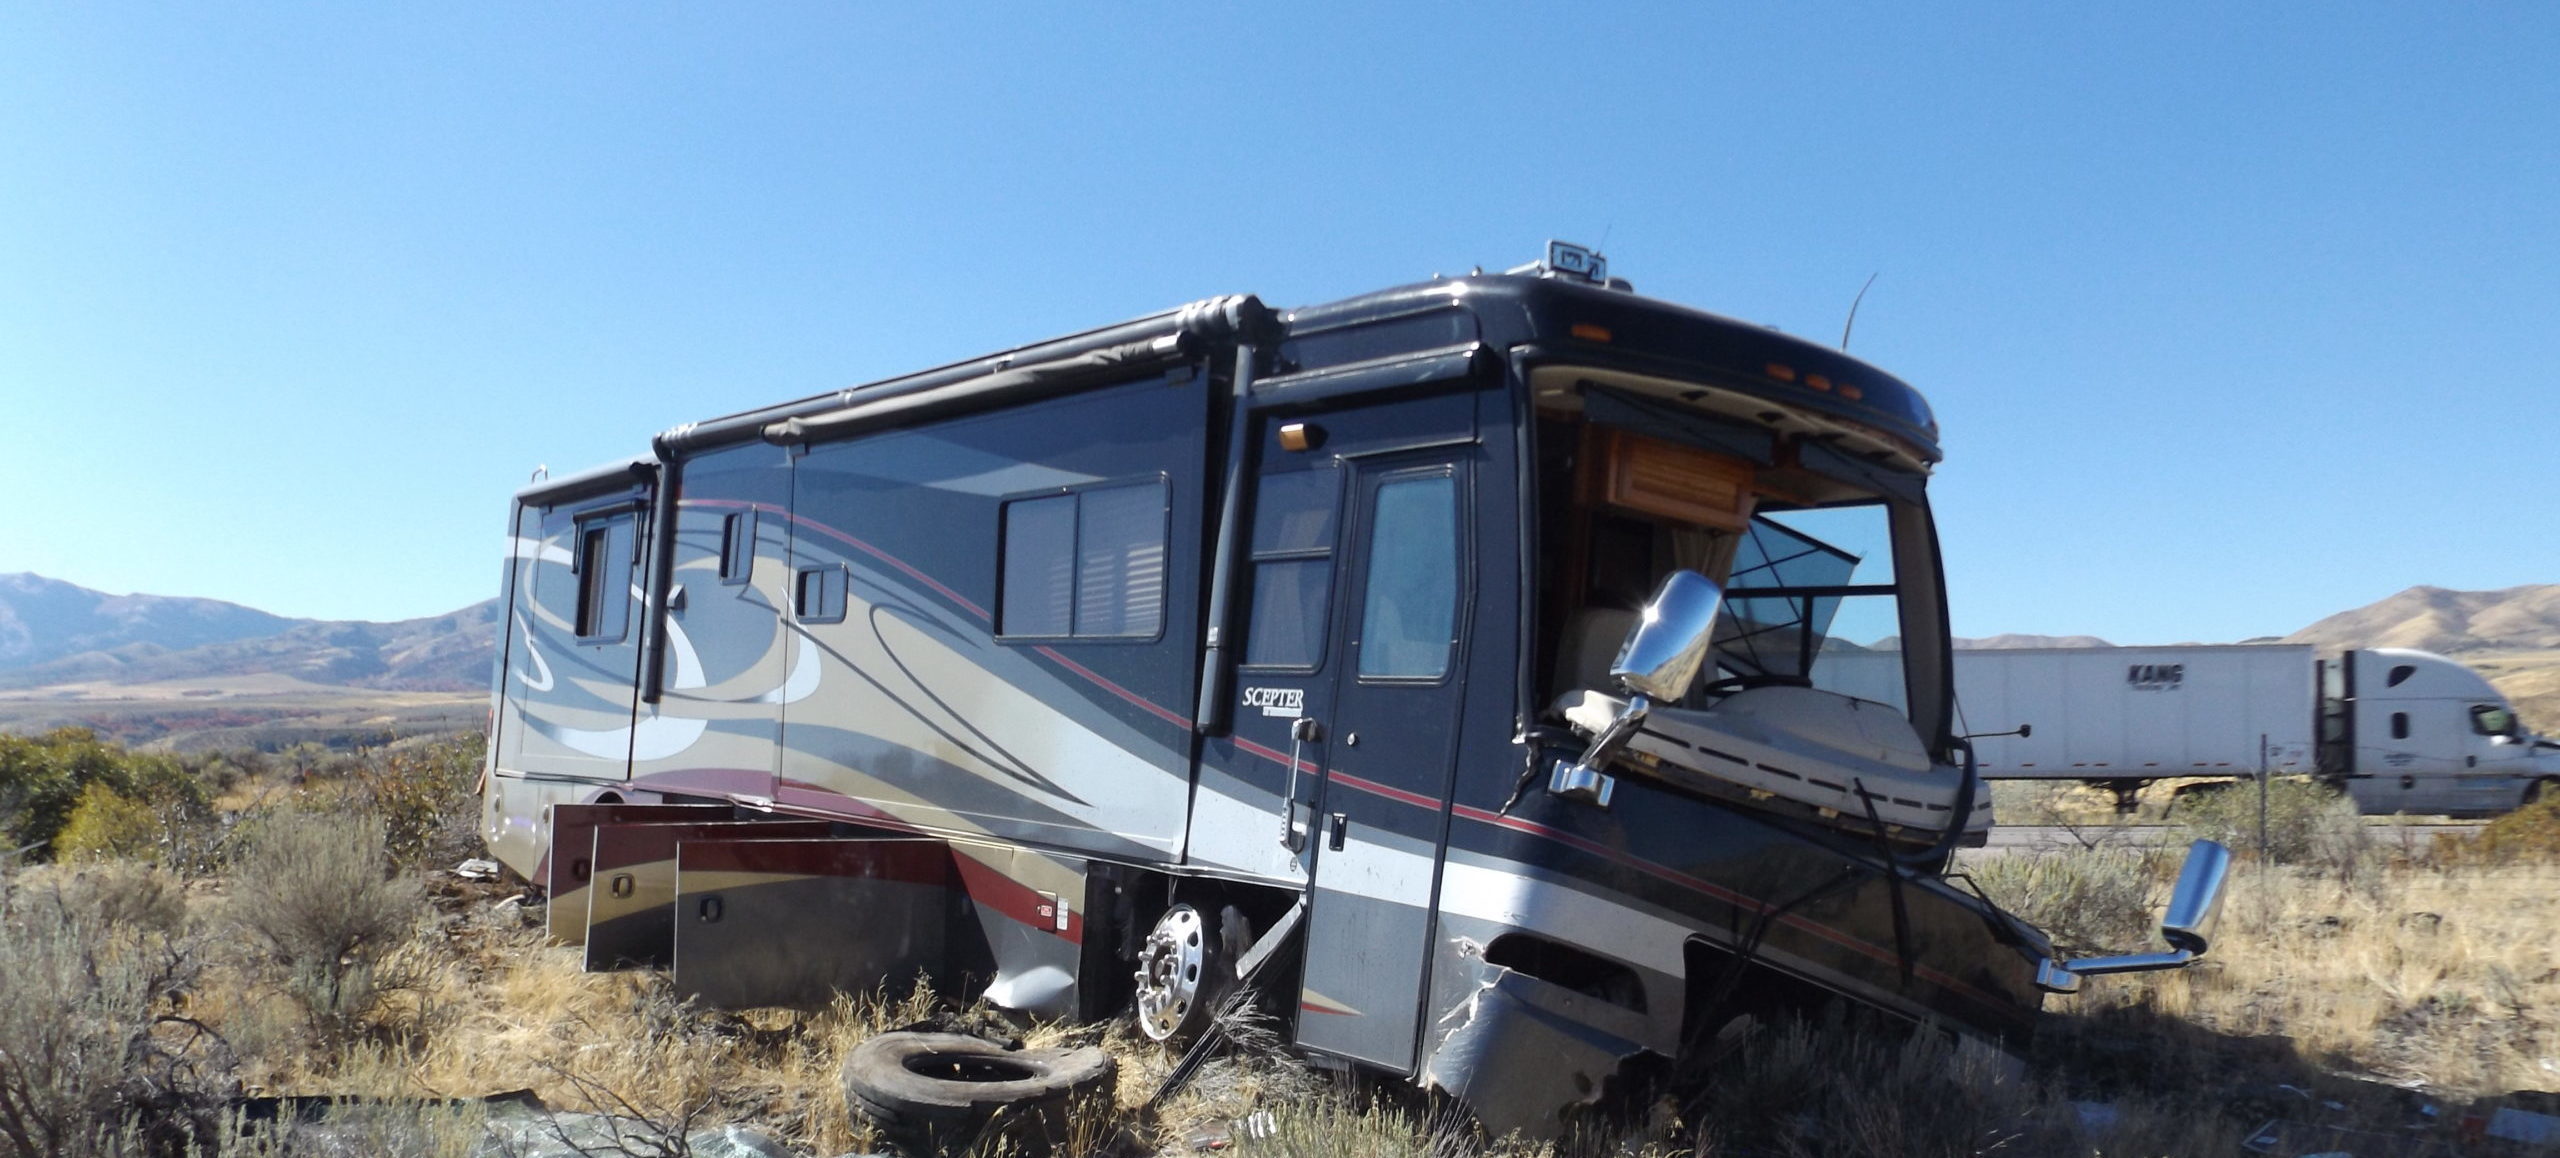 Idaho State Police are investigating a motorhome crash Sunday afternoon that injured two people fro...